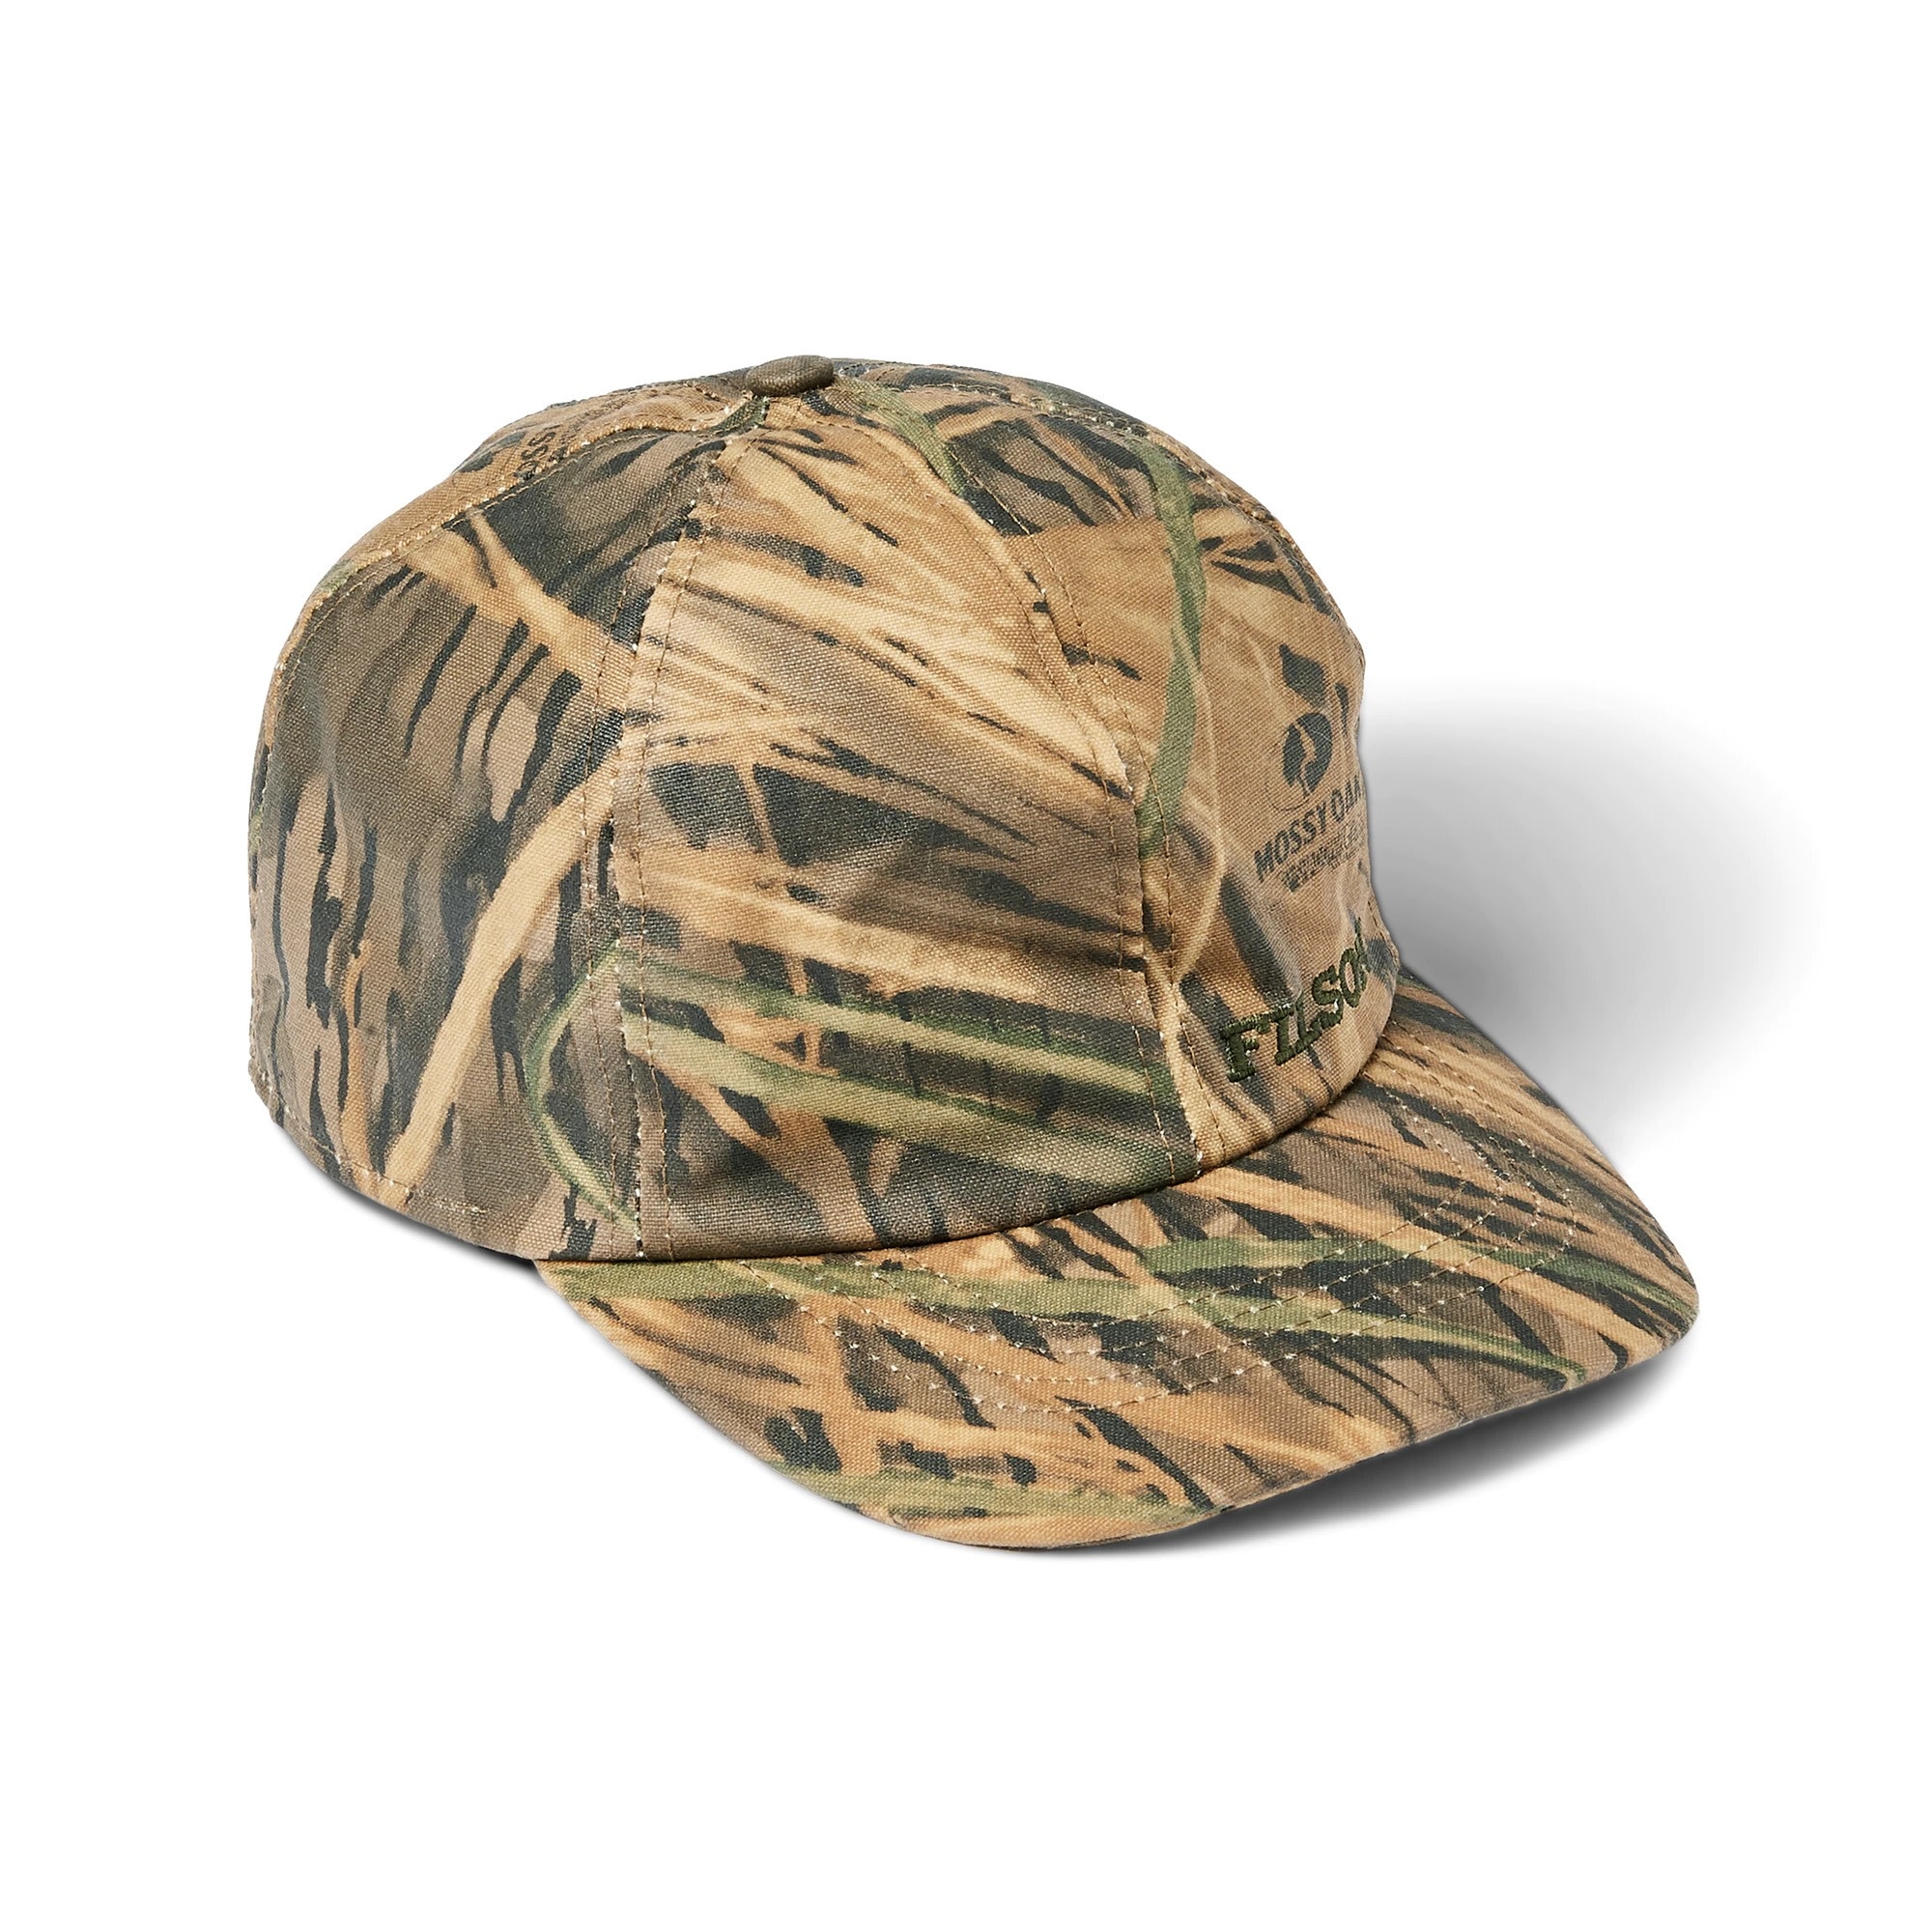 Filson X Mossy Oak Camo Insulated Tin Cloth Cap - The Painted Trout